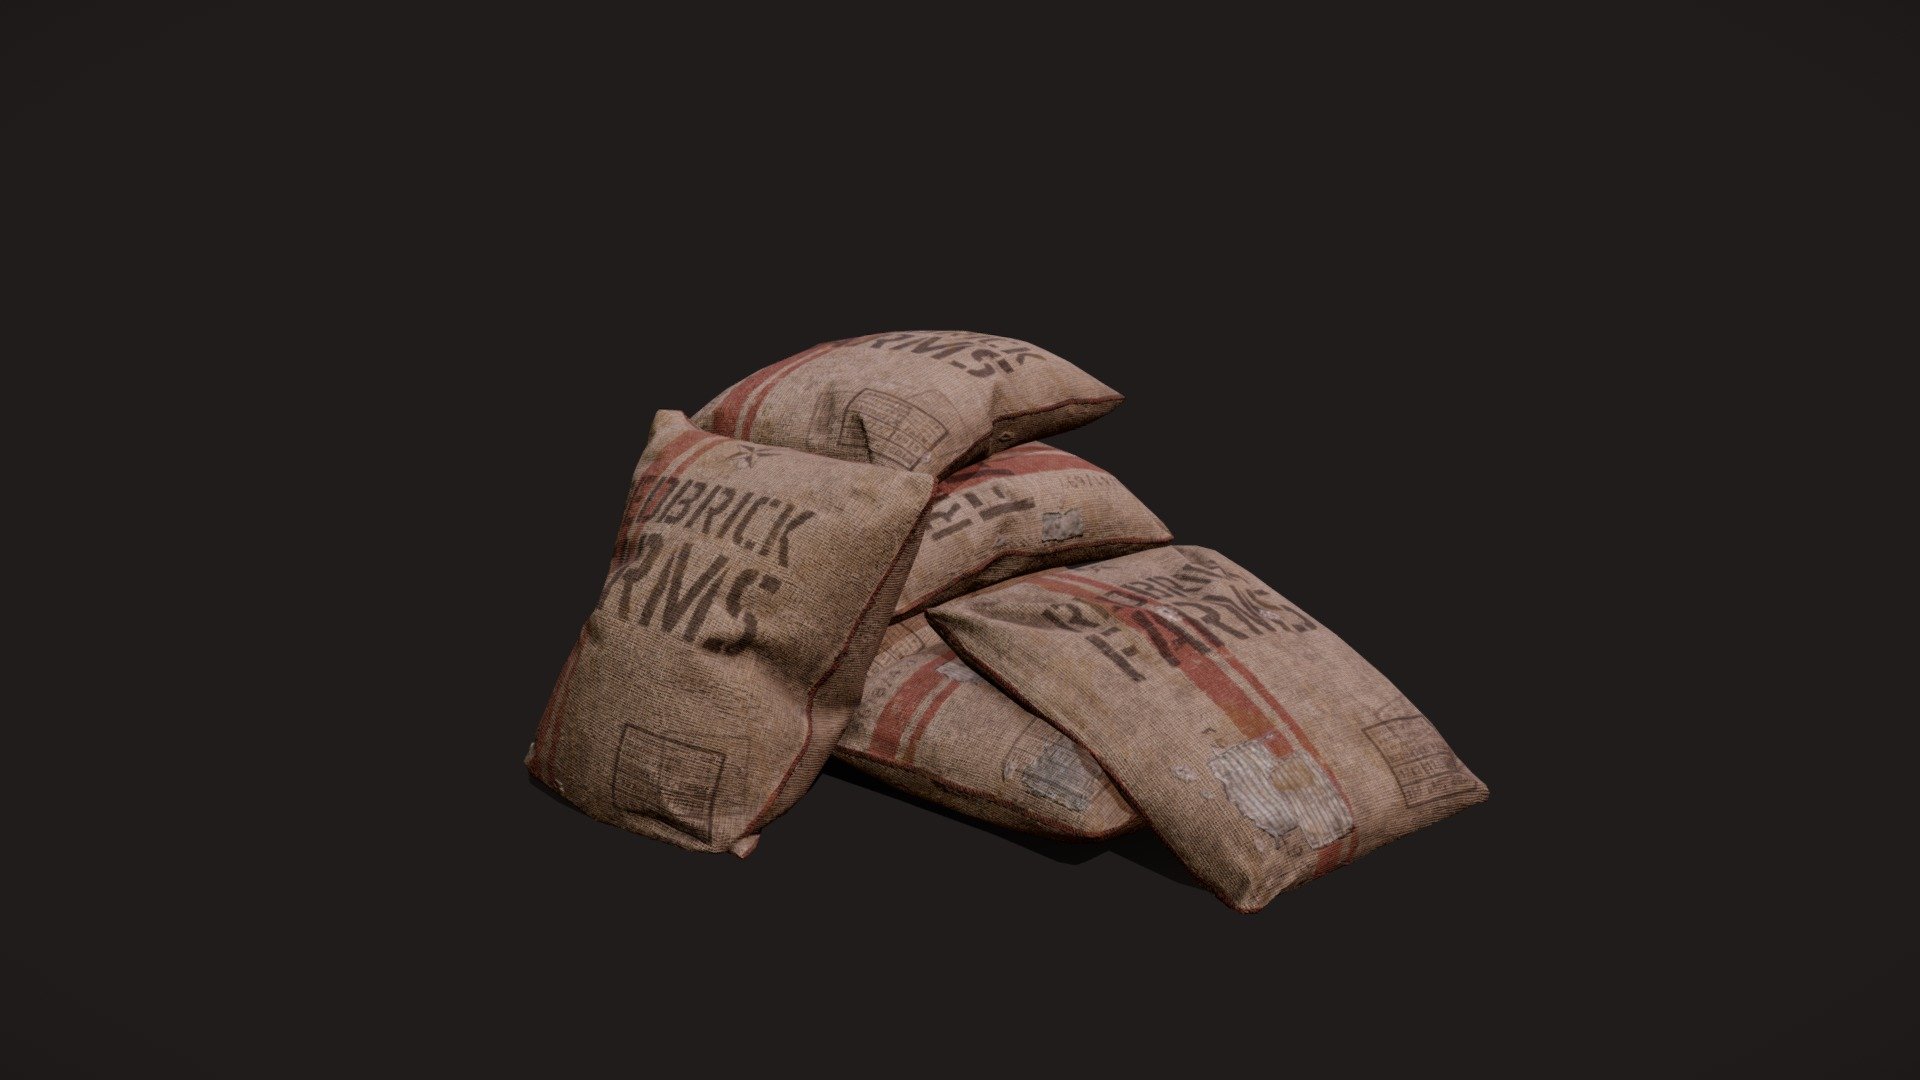 Glad to present the farm sacks that I made for my Greenhouse scene.

The sacks are made as game assets, they can be separated into 3 separately textured parts. The texture archive contains 4k BC, N (DirectX), M, R maps, as well as combined ORM map.

P.s. If you use my models in any projects, please don’t be shy to share the link to the project, I would be delighted to see my work in action :) - Farm Sacks - 3D model by panrichi 3d model